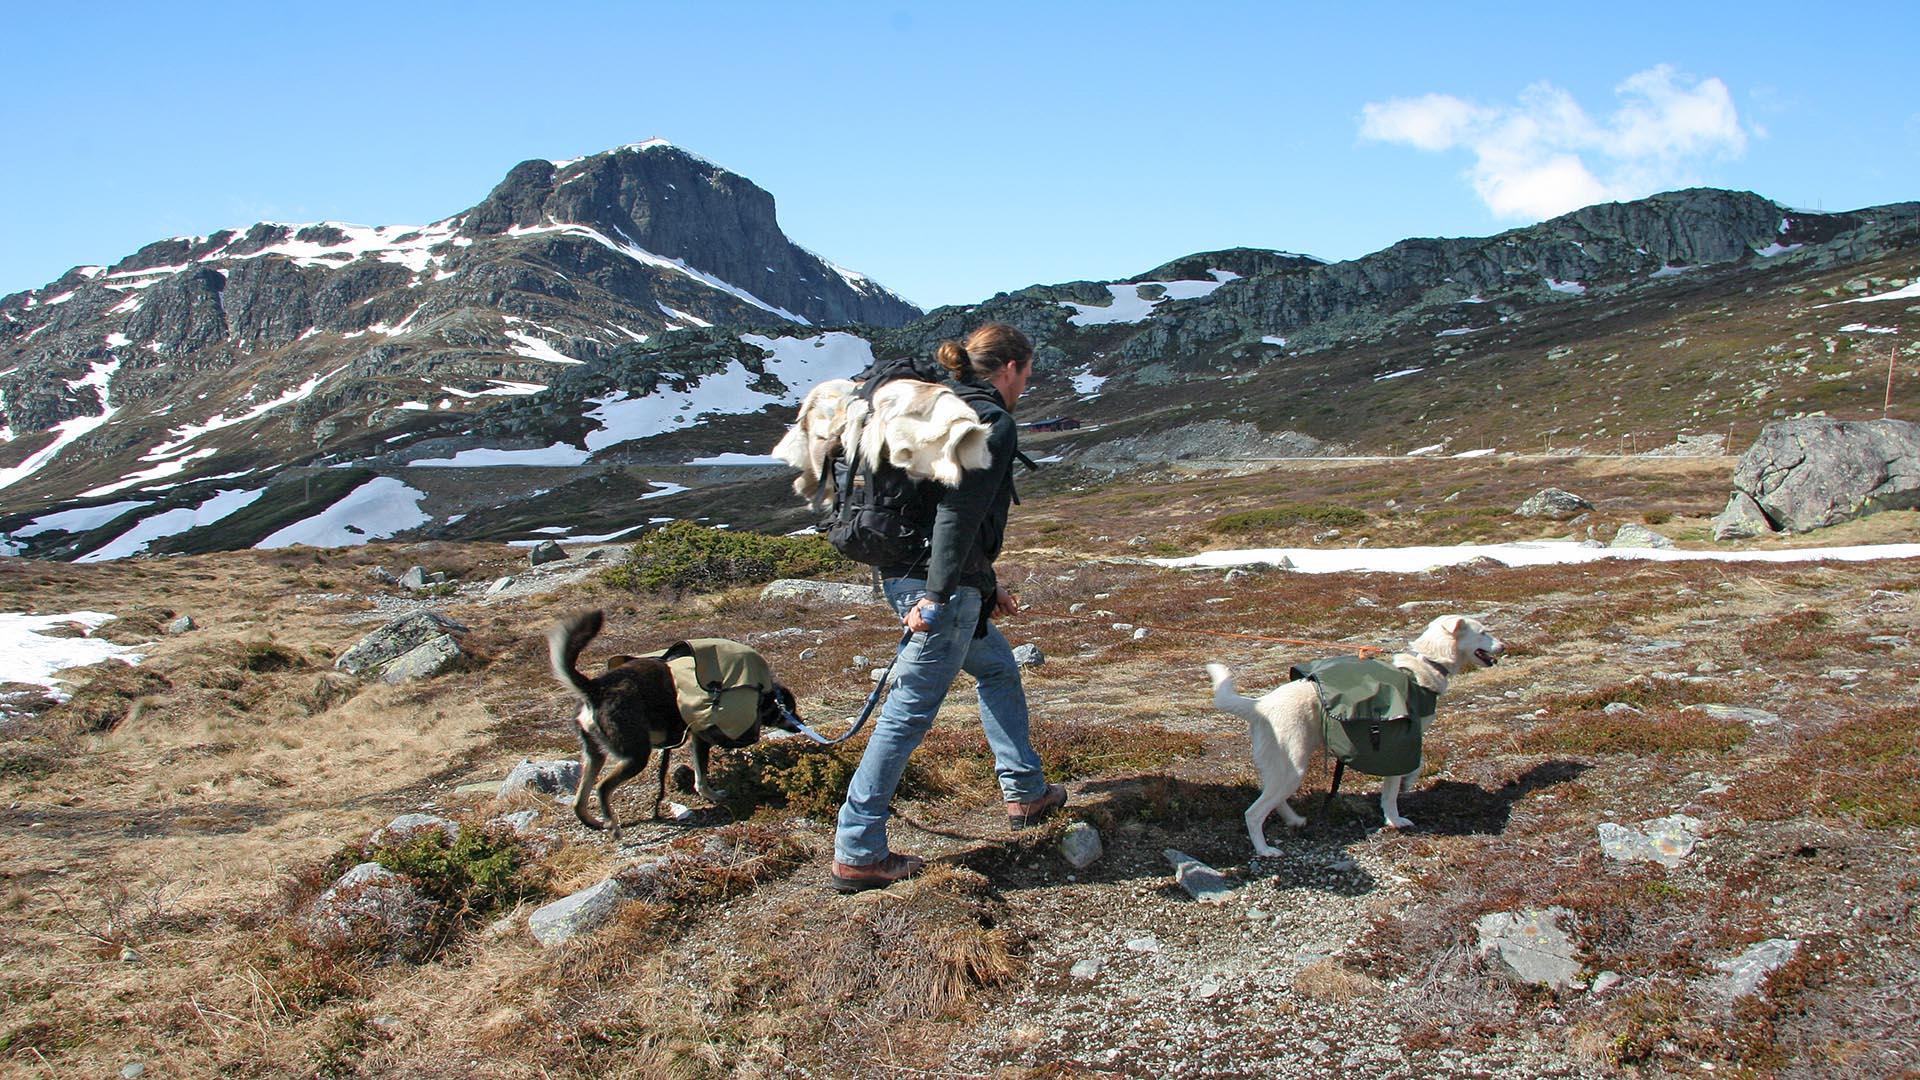 A man with backpack walks in open high country with two huskies that are each carrying their own dog pack. A mountain rises in the background.